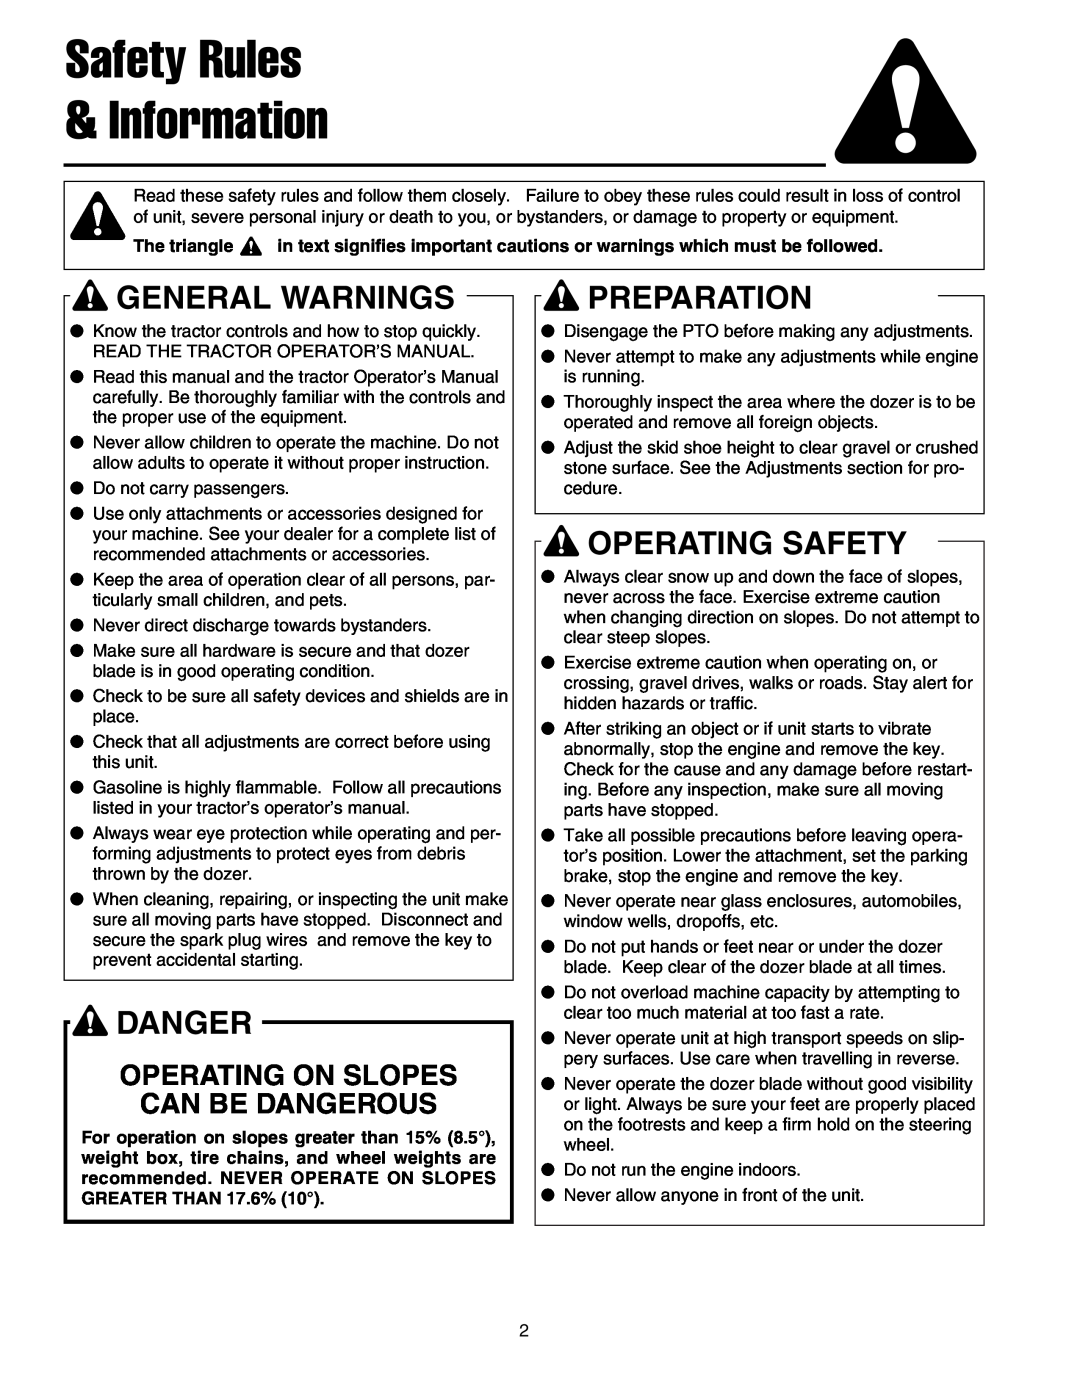 Snapper 1721303-01 manual Safety Rules & Information, General Warnings, Danger, Preparation, Operating Safety 